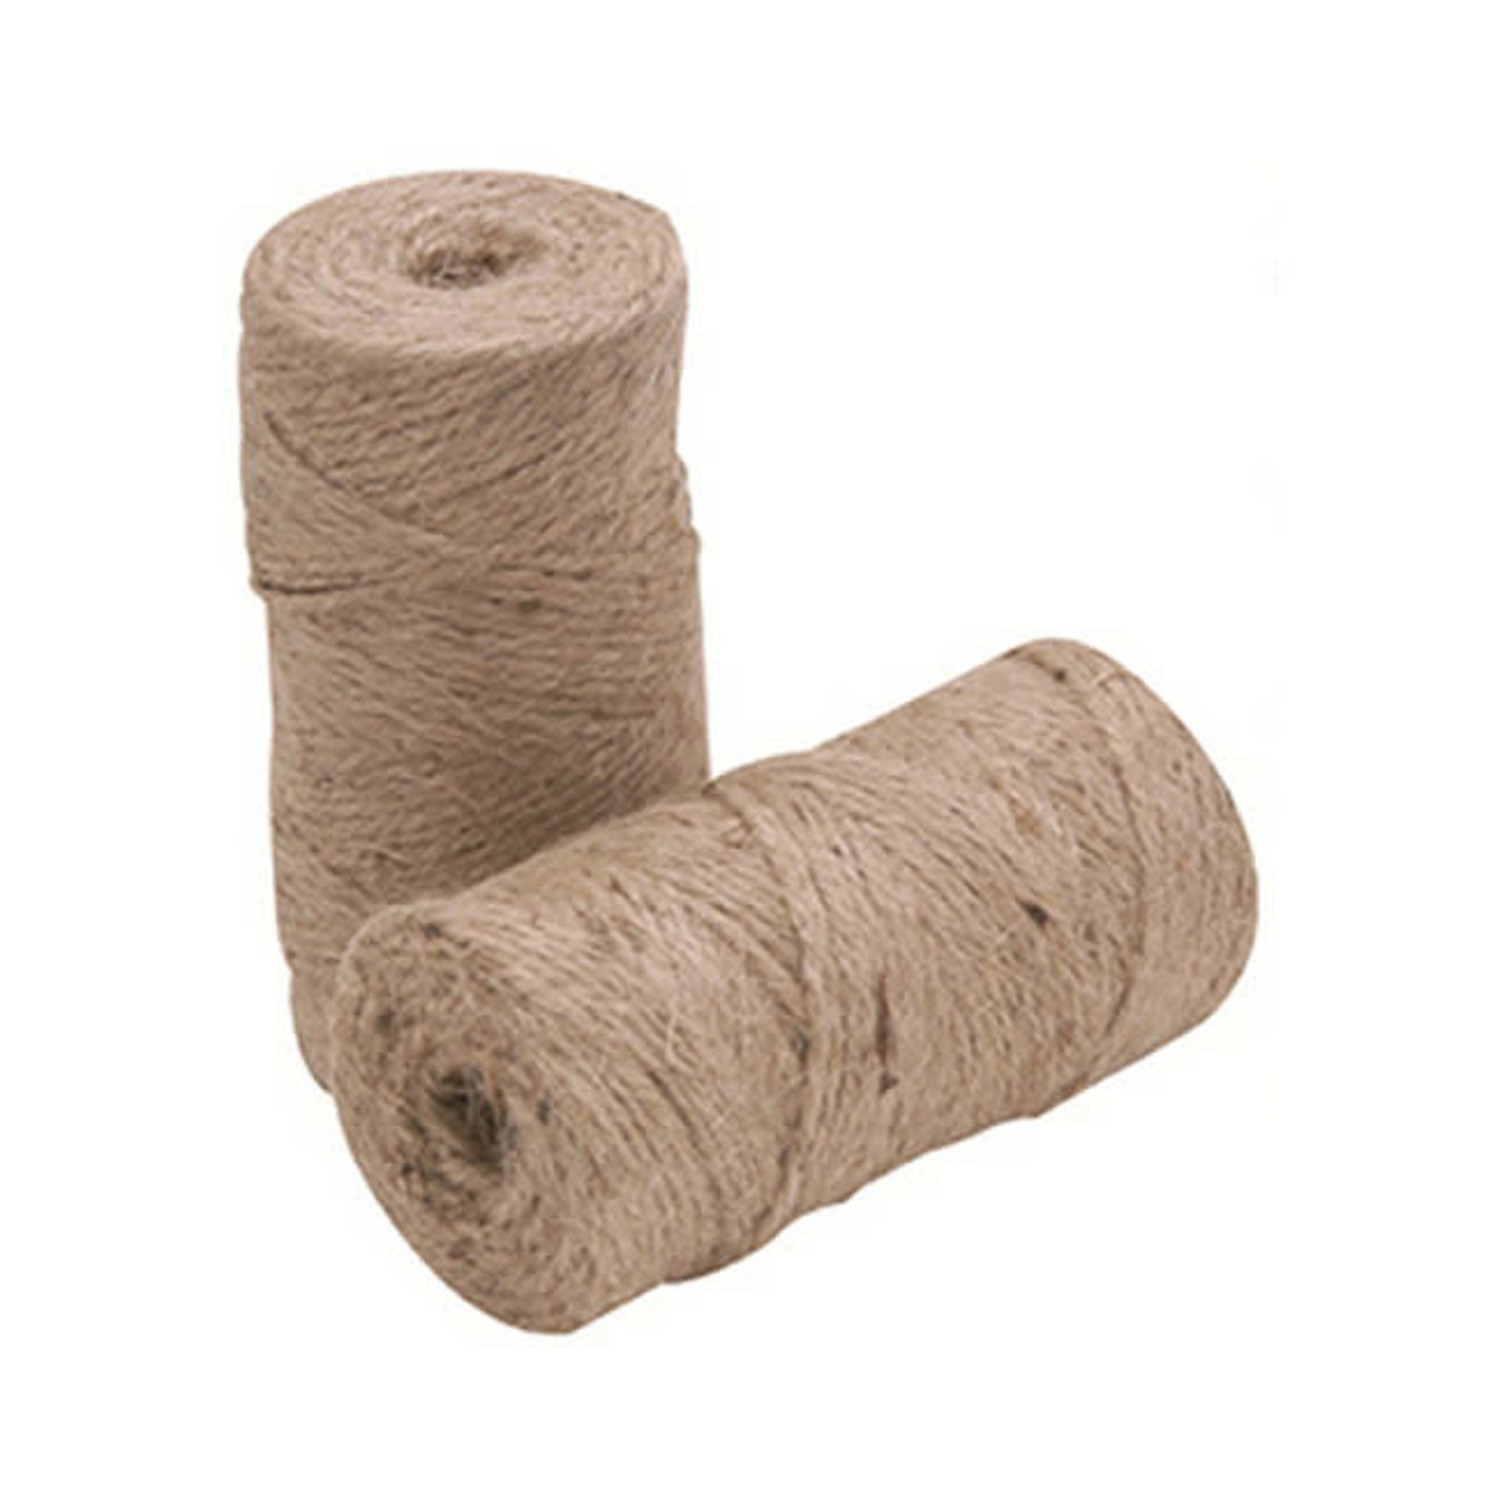 CleverDelights White Jute Twine - 100 Yards - 2mm Diameter - Eco-Friendly Natural Jute Twine String Rope